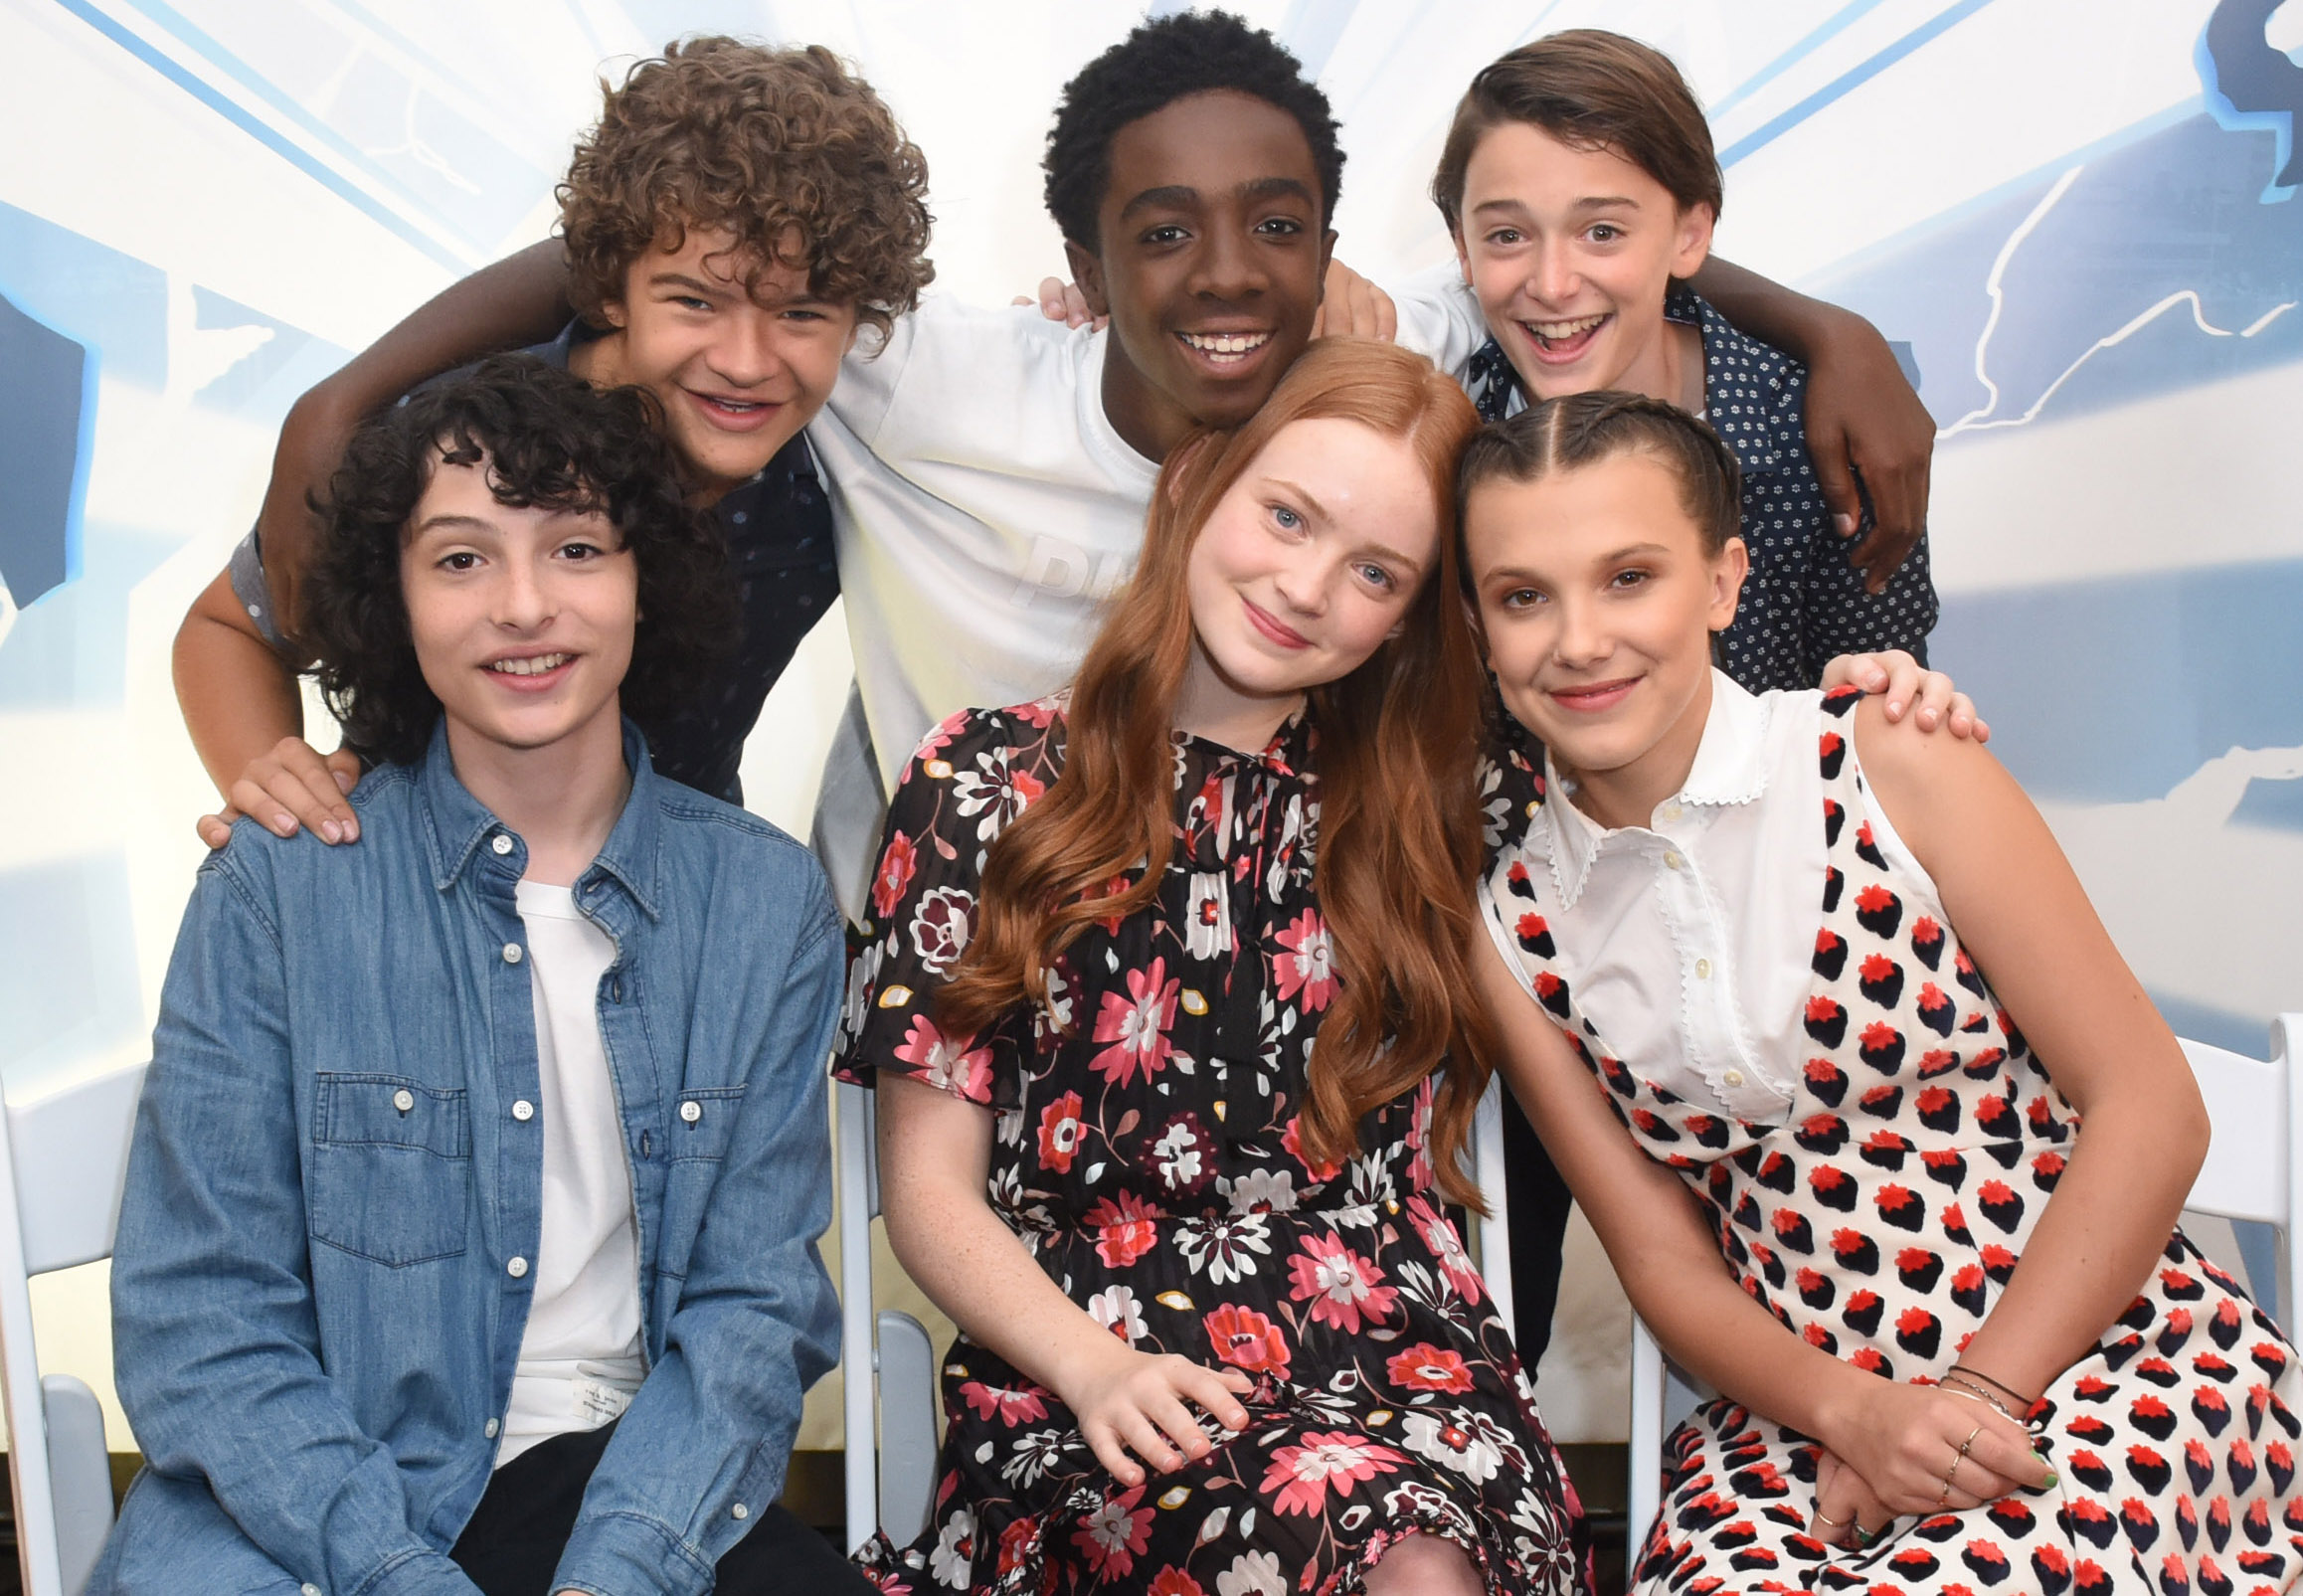 Stranger Things Cast Could Be Twins With Other Celebs: See Pics